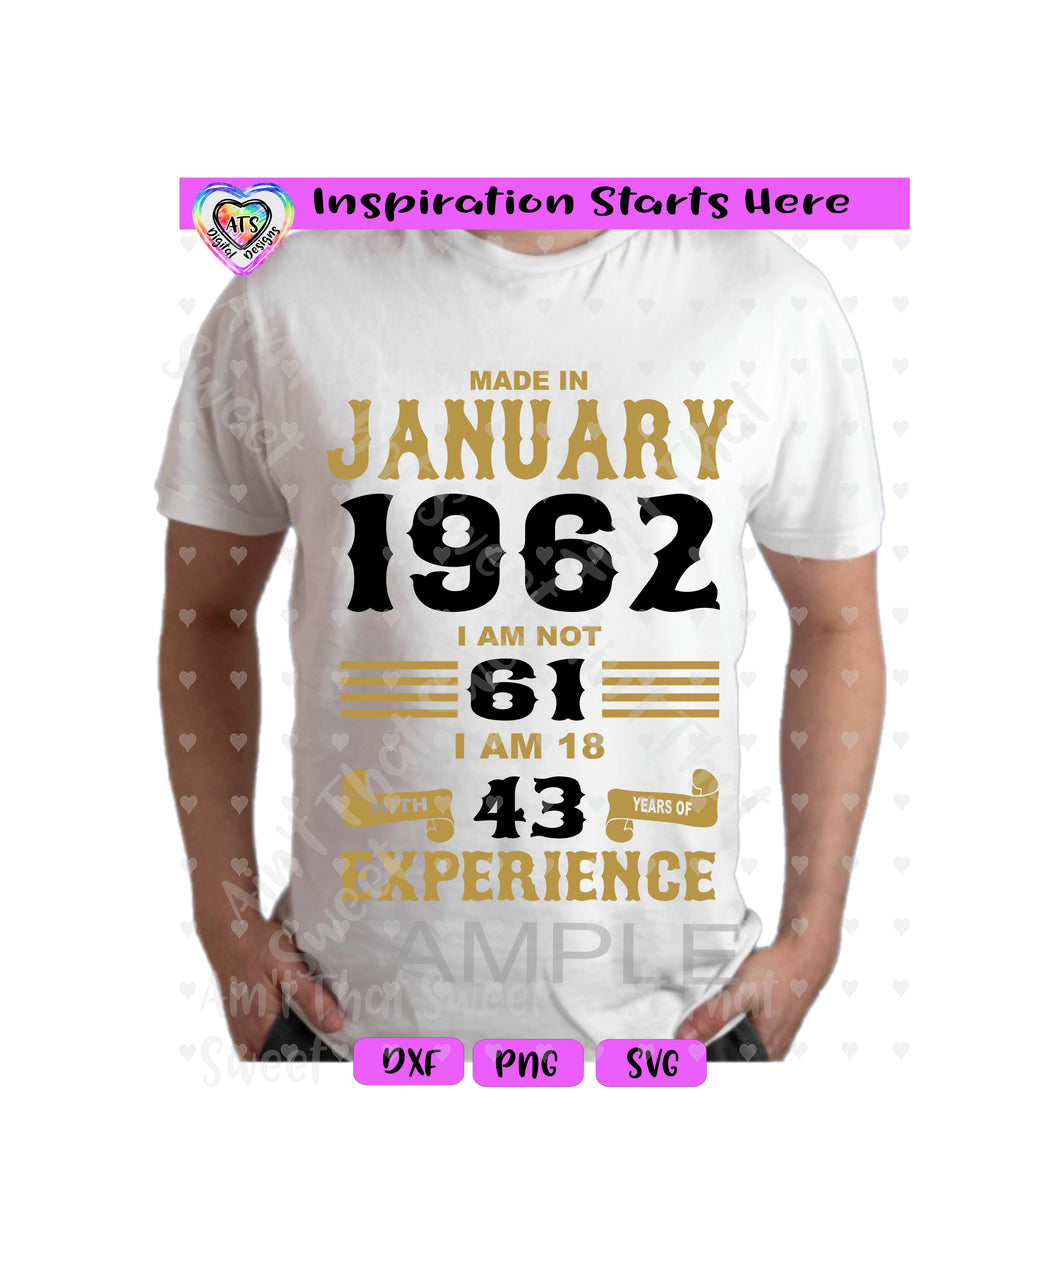 Made in January 1962 | I Am Not 61 | I Am 18 with 43 Years Of Experience (based on 2023) | Transparent PNG SVG DXF (Based on 2023) - Silhouette, Cricut, ScanNCut